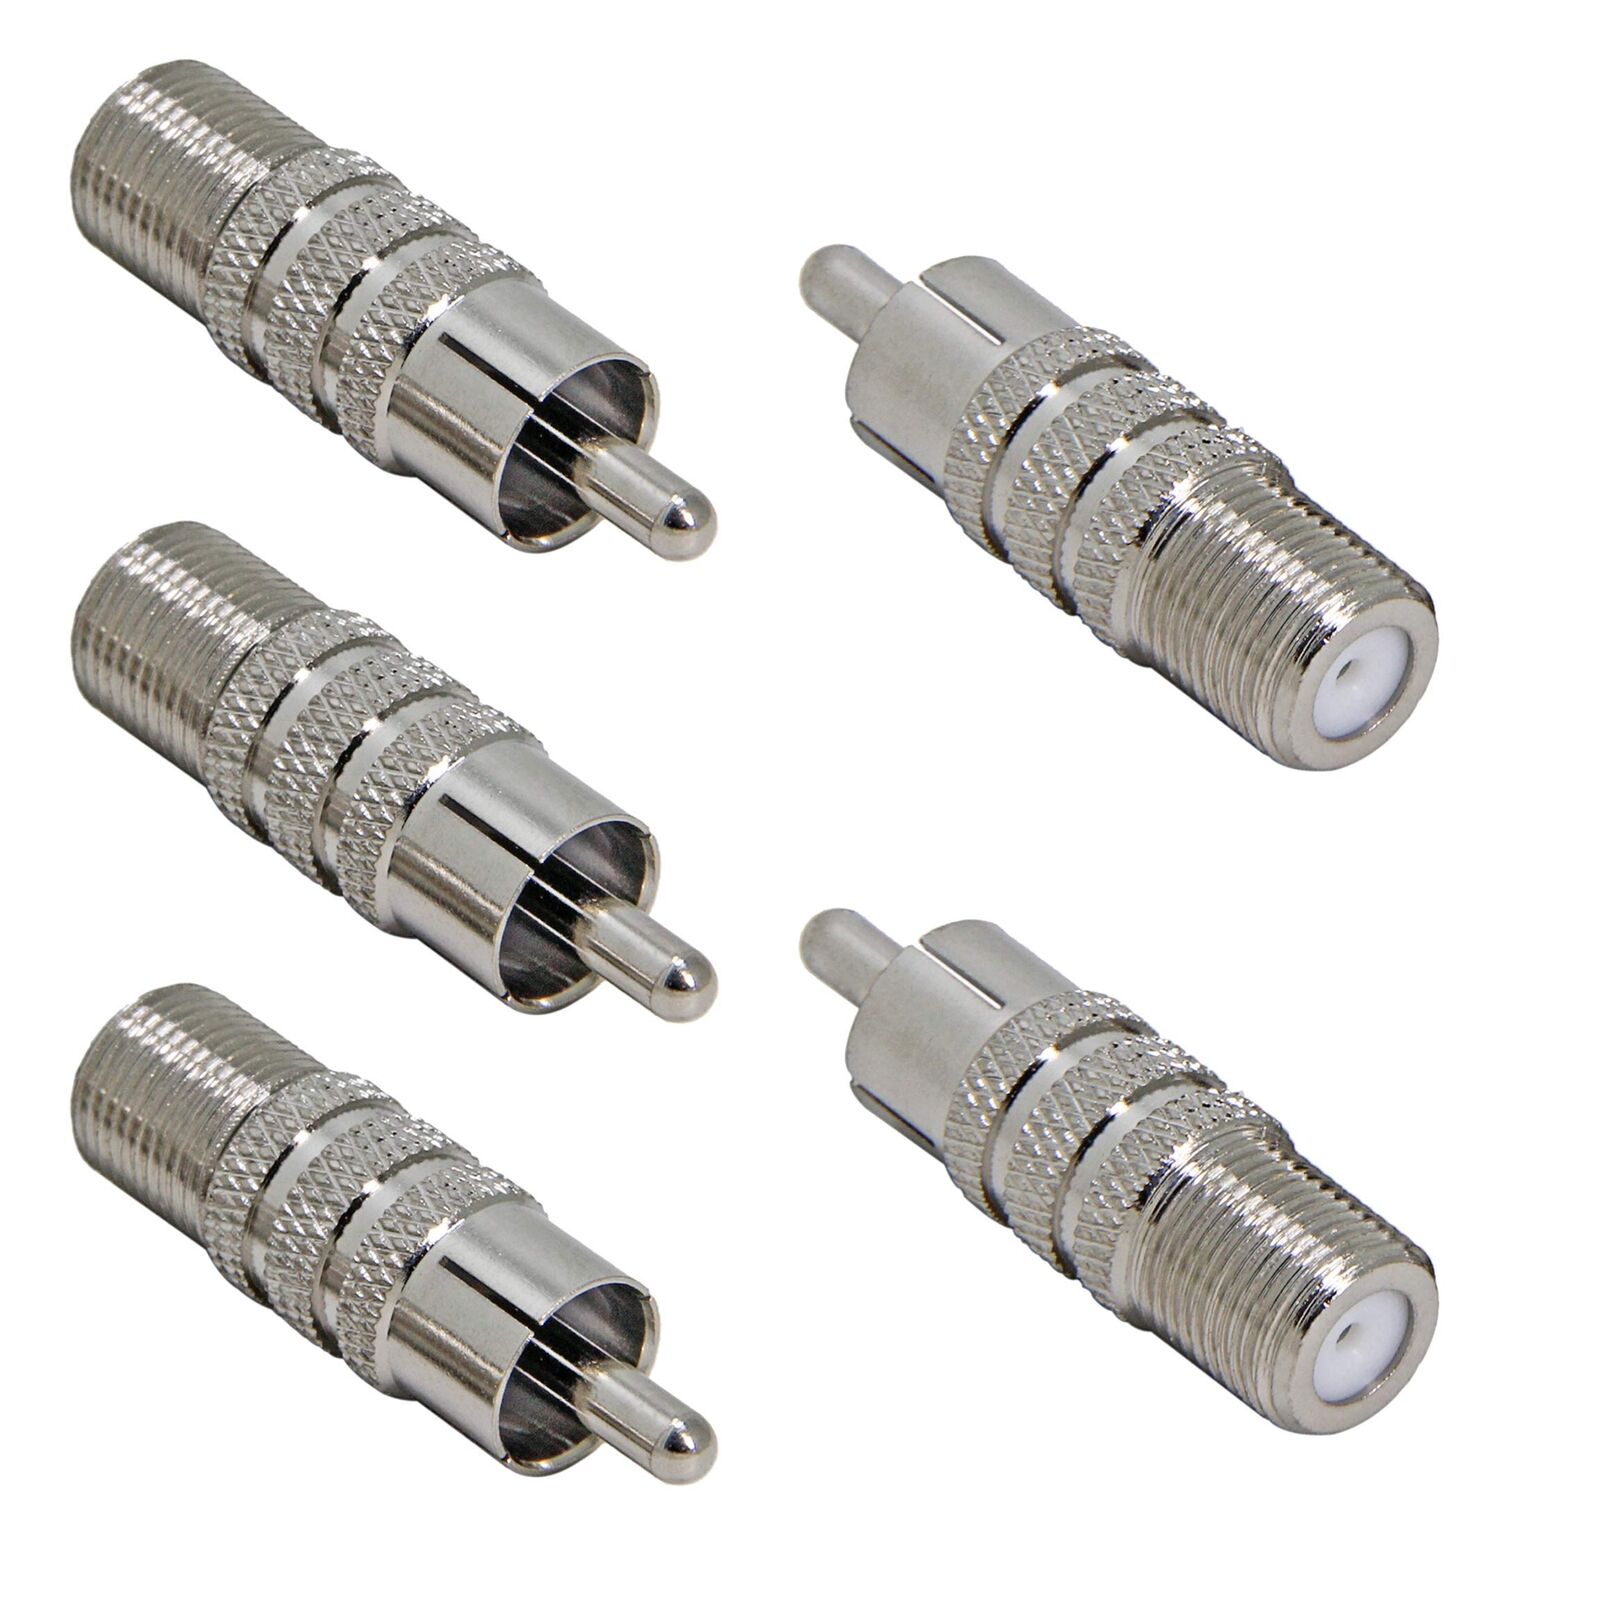 Clever F Female to RCA Male, 5-Pack Coax to RCA Adapter Audio Video Connector for Su… on eBay